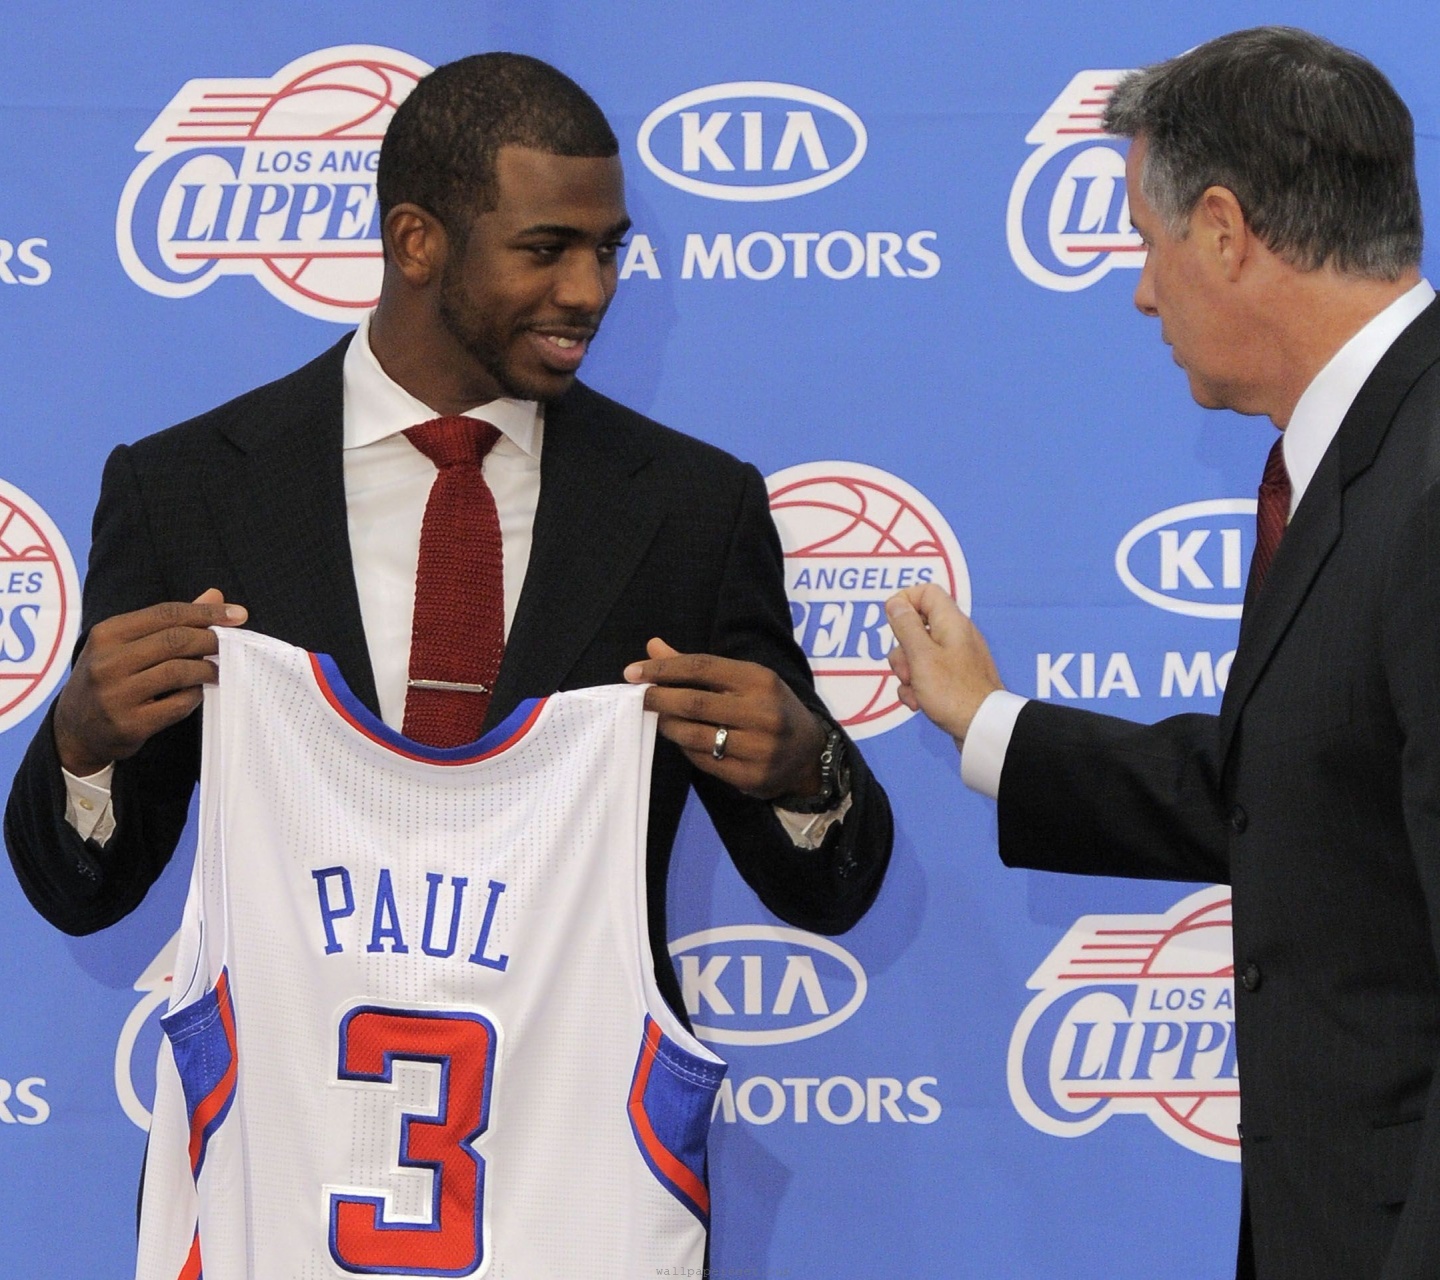 Los Angeles Clippers Nba American Basketball All Star Point Guard Chris Paul